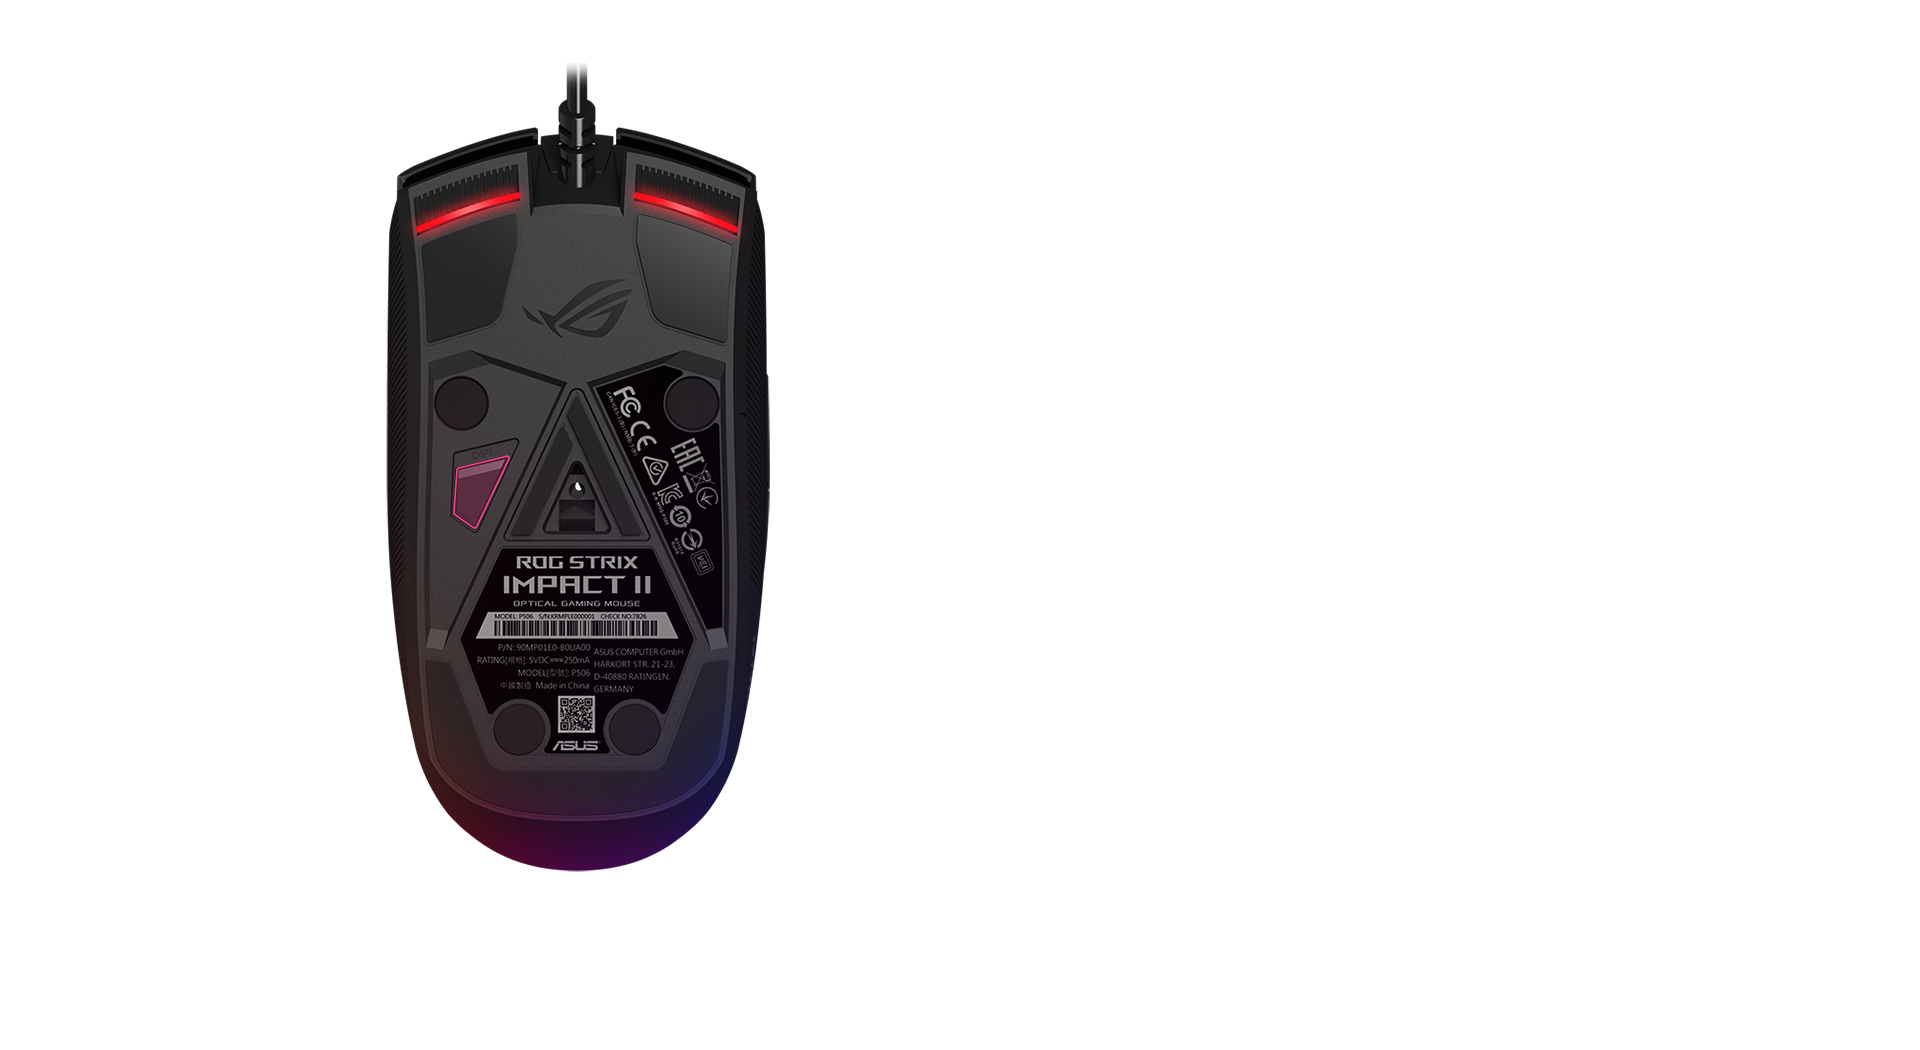 G2 mouse. ASUS ROG Strix Impact 2 Wireless. ASUS ROG Strix Impact 2 мышь. ASUS [90mp01e0-b0ua00] p506 ROG Strix Impact II. ROG Impact Gaming Mouse.